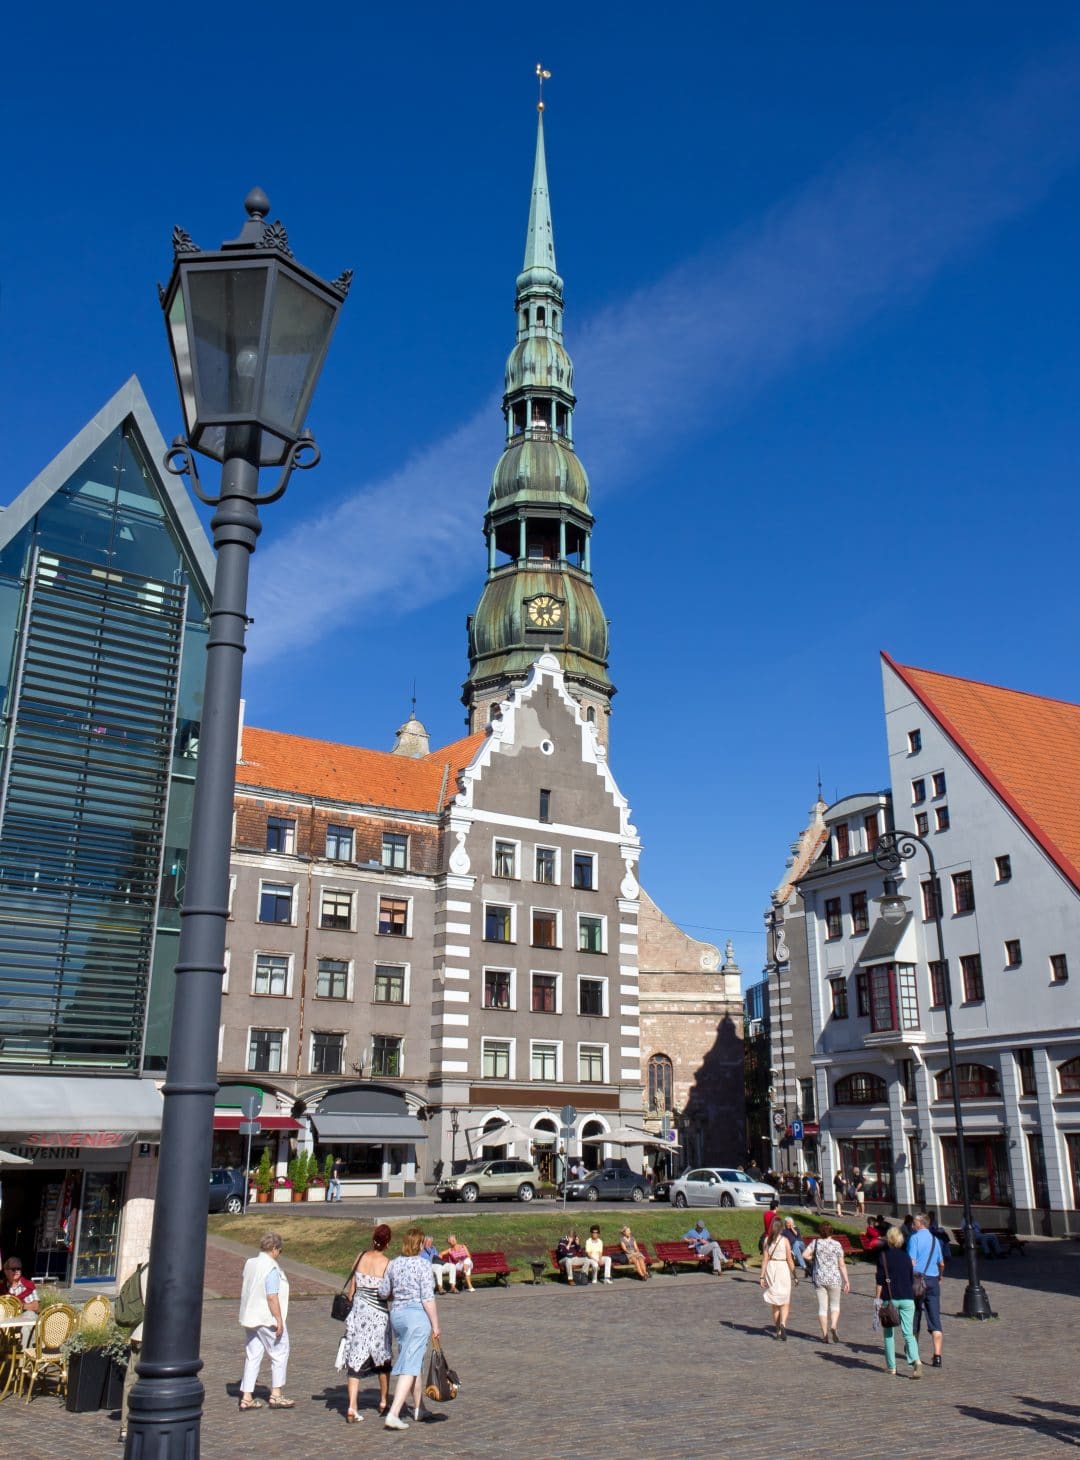 View of a part of the Town Hall square in Riga, Latvia, with the steeple of St. Peter's Church in the background